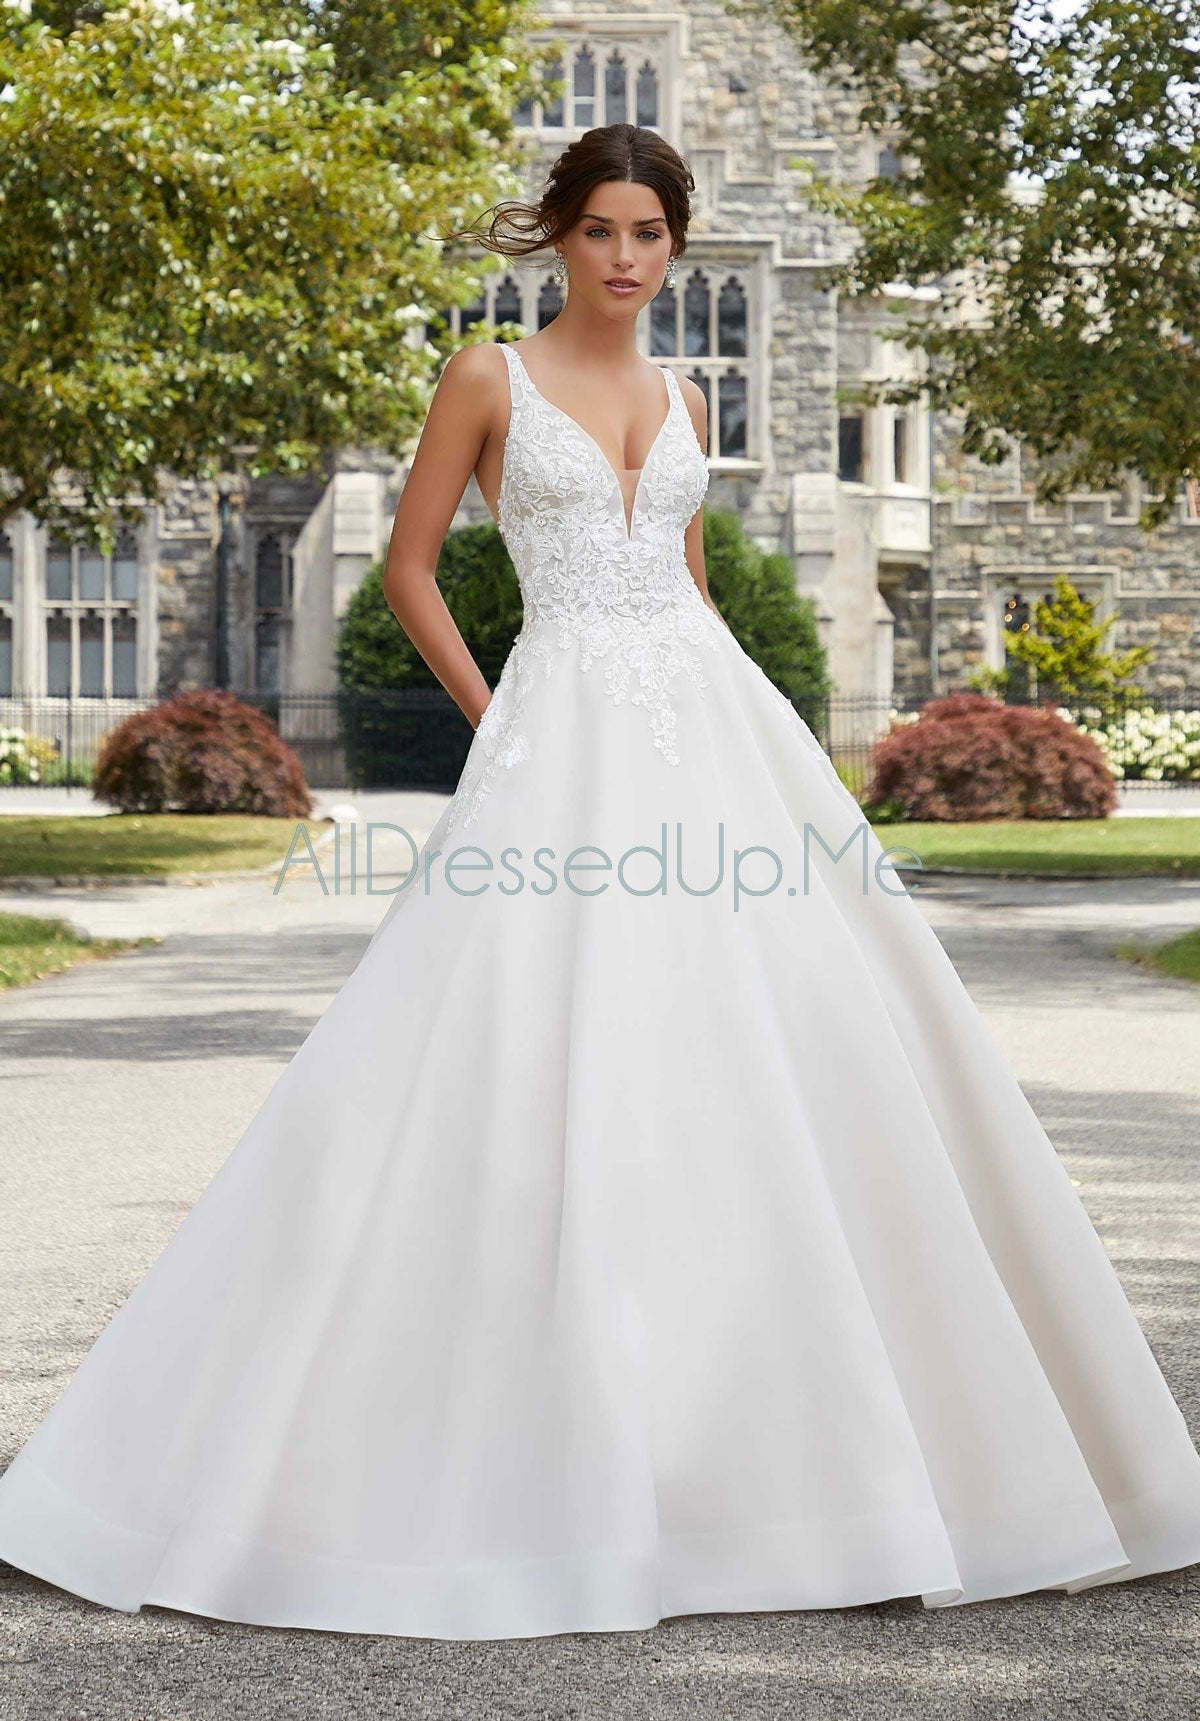 Last Dress In Store; Size: 8, Color: Ivory/Rose | Blu - Sabrina - 5809 - Cheron's Bridal & All Dressed Up Prom - 8 - Wedding Gowns Dresses Chattanooga Hixson Shops Boutiques Tennessee TN Georgia GA MSRP Lowest Prices Sale Discount